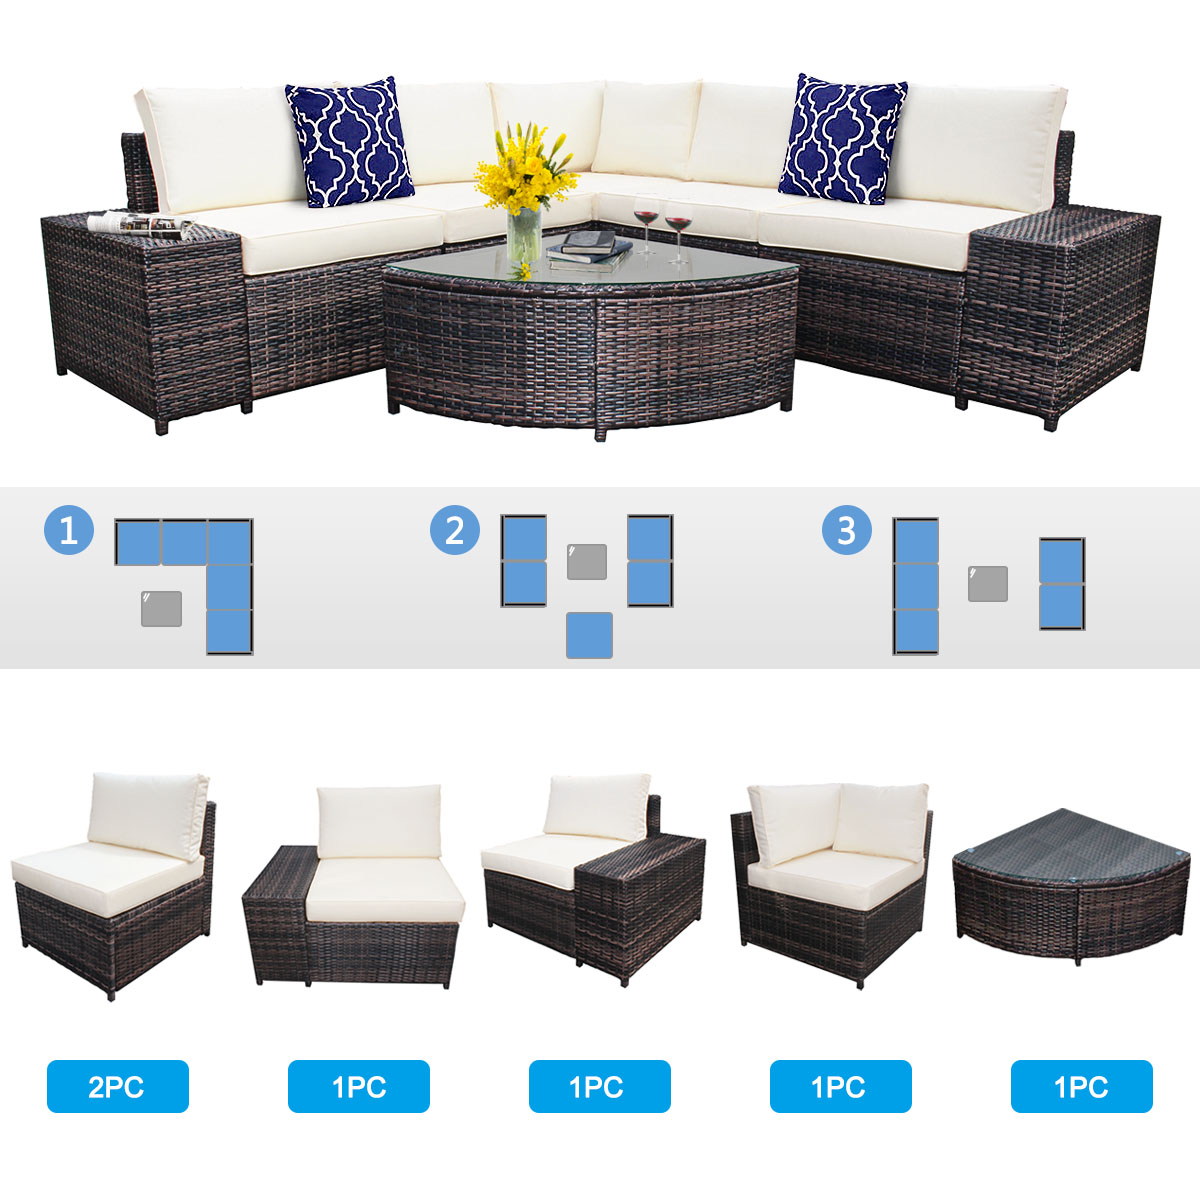 Patiojoy 6-Piece Outdoor Rattan Conversation Set Sectional Sofa Set with Arc-Shaped Table White - image 4 of 6